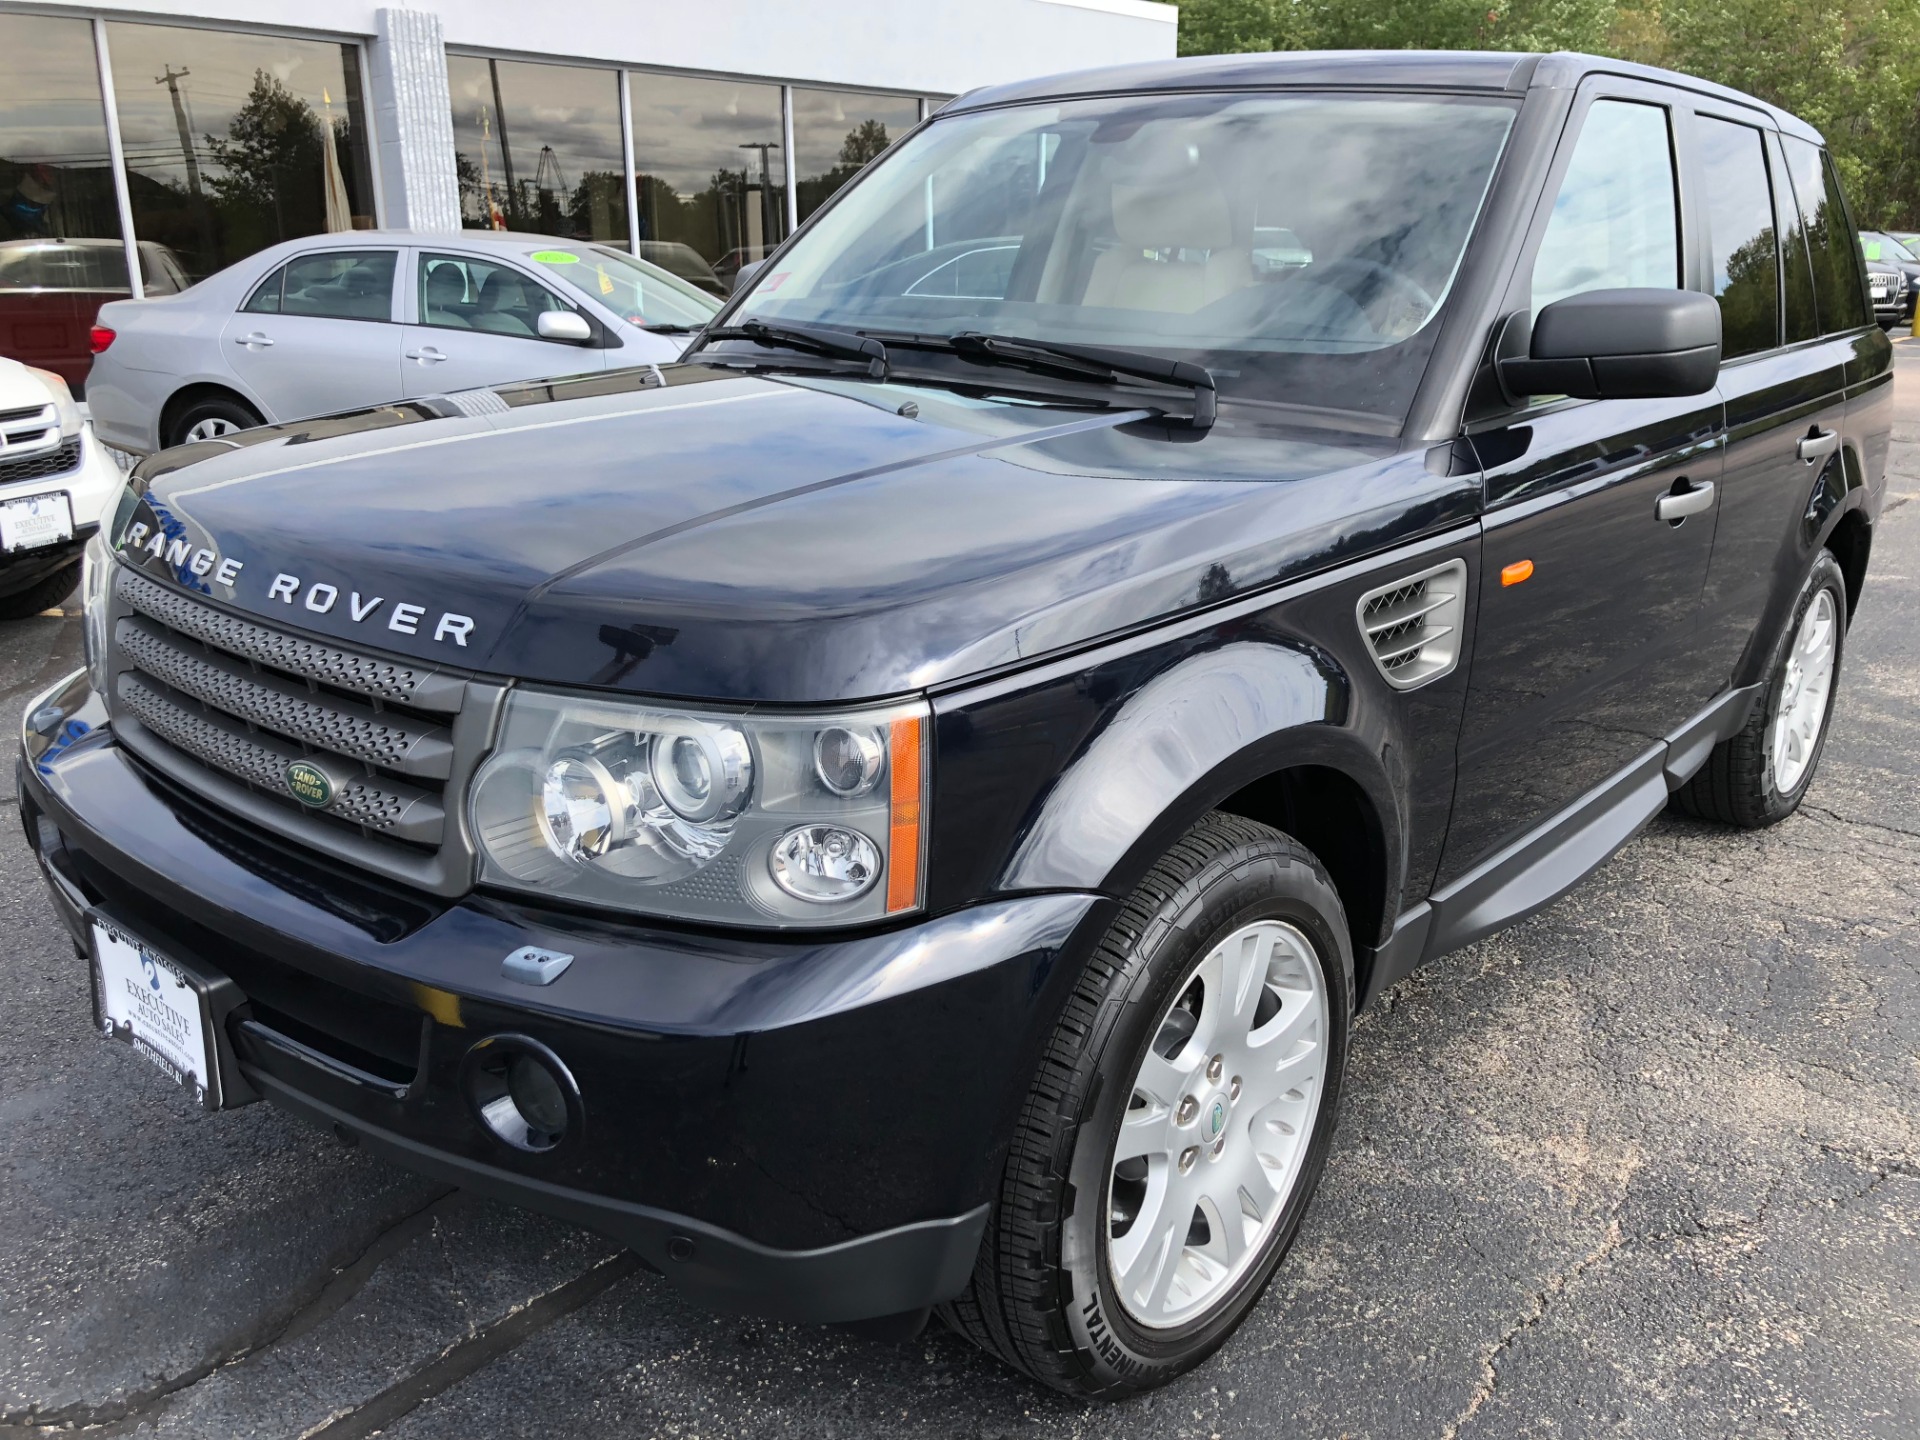 Used 2006 LAND ROVER RANGE ROVER SPO HSE For Sale ($13,500) | Executive